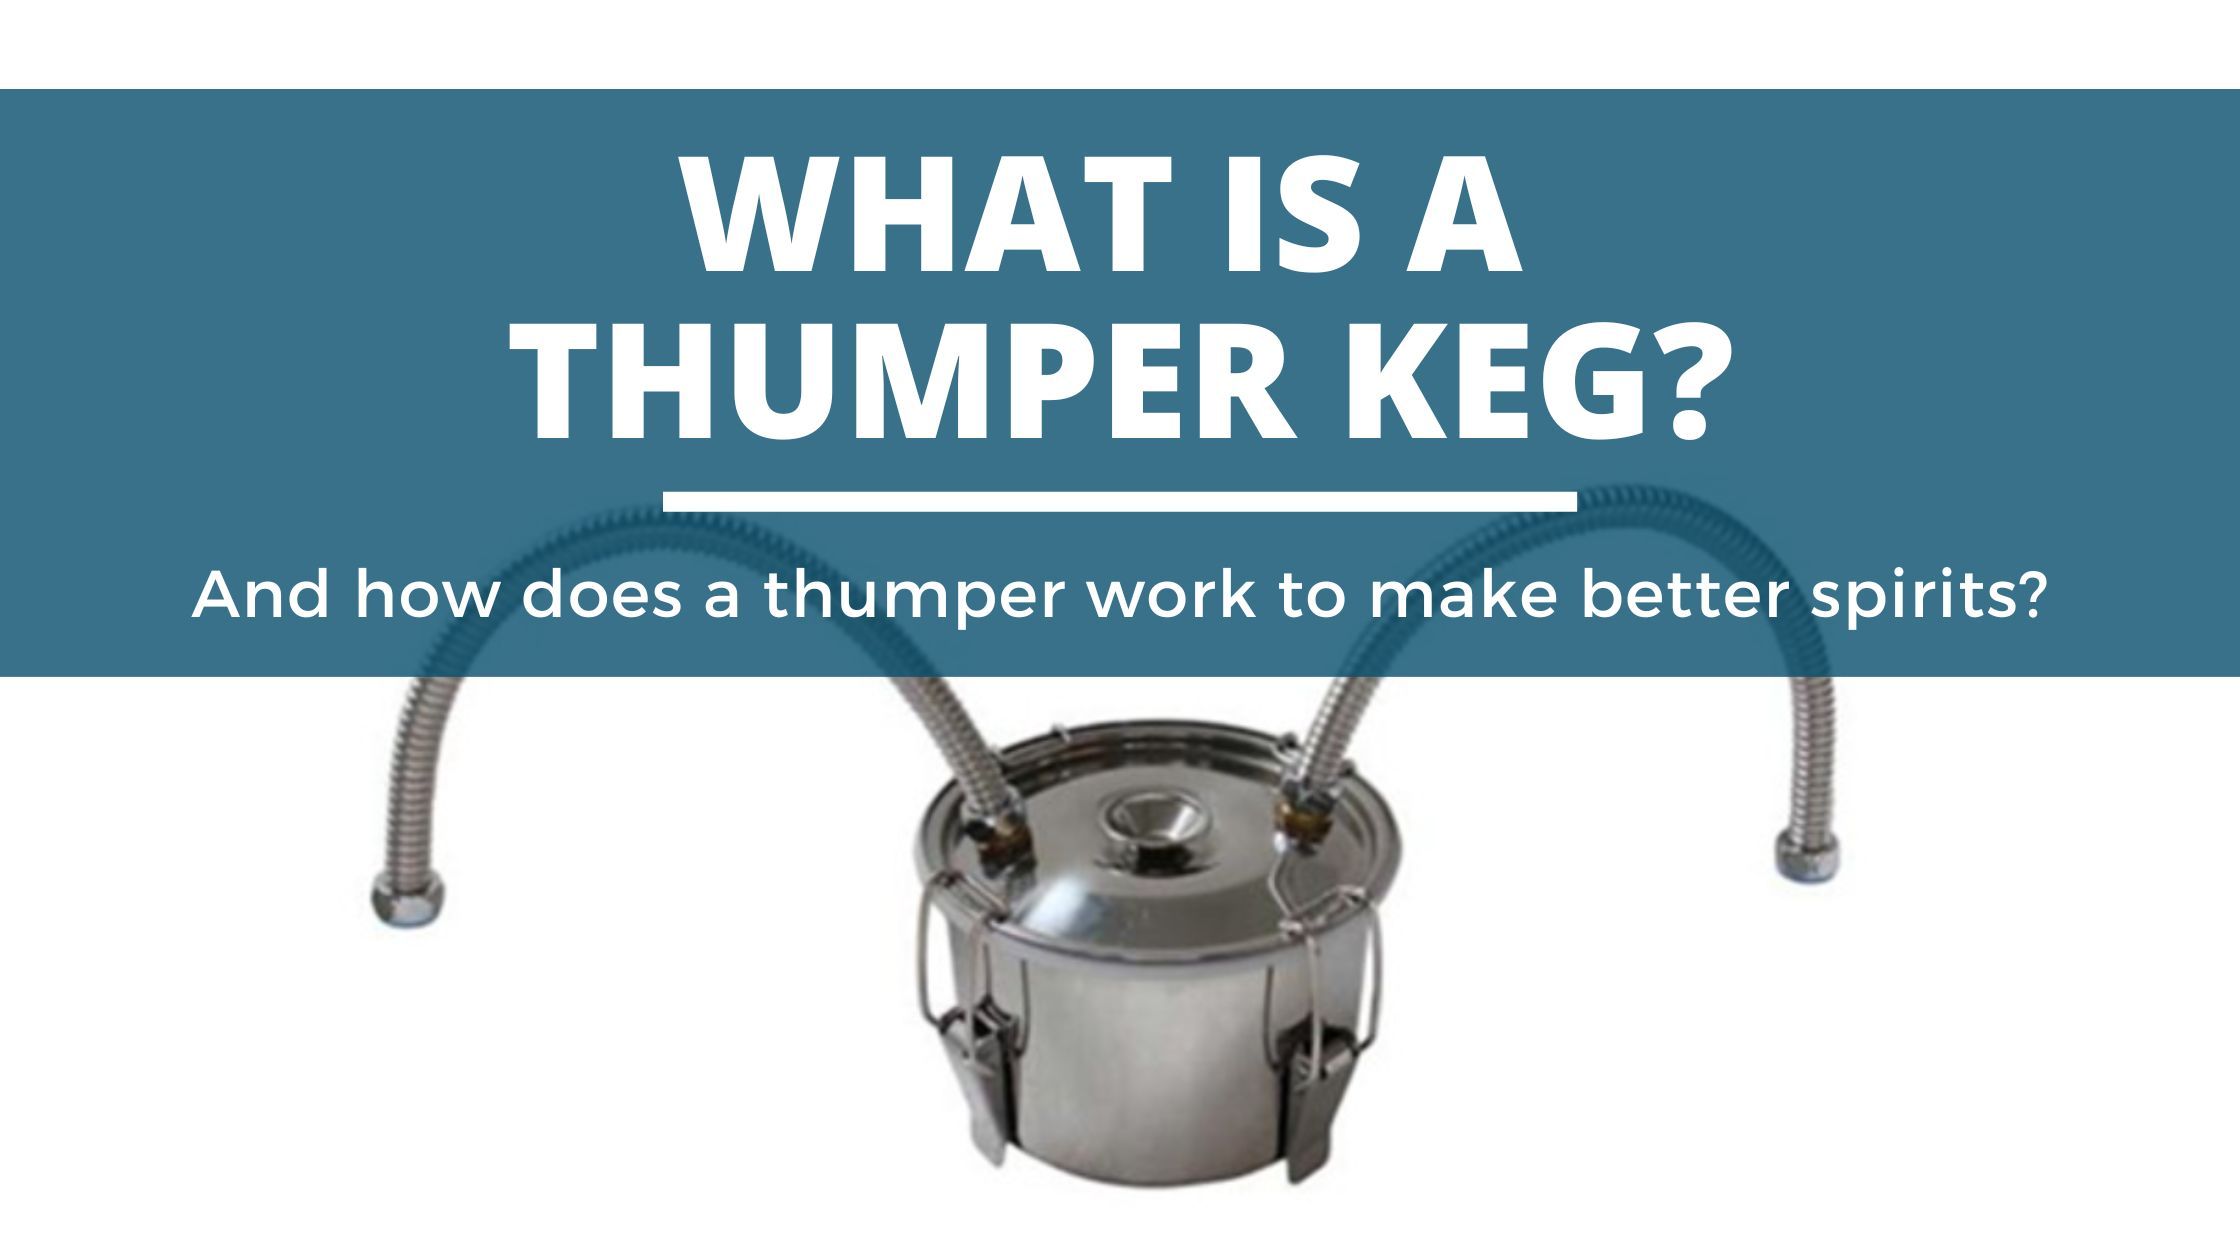 Image of diy distilling what is a thumper keg and how does a thumper work